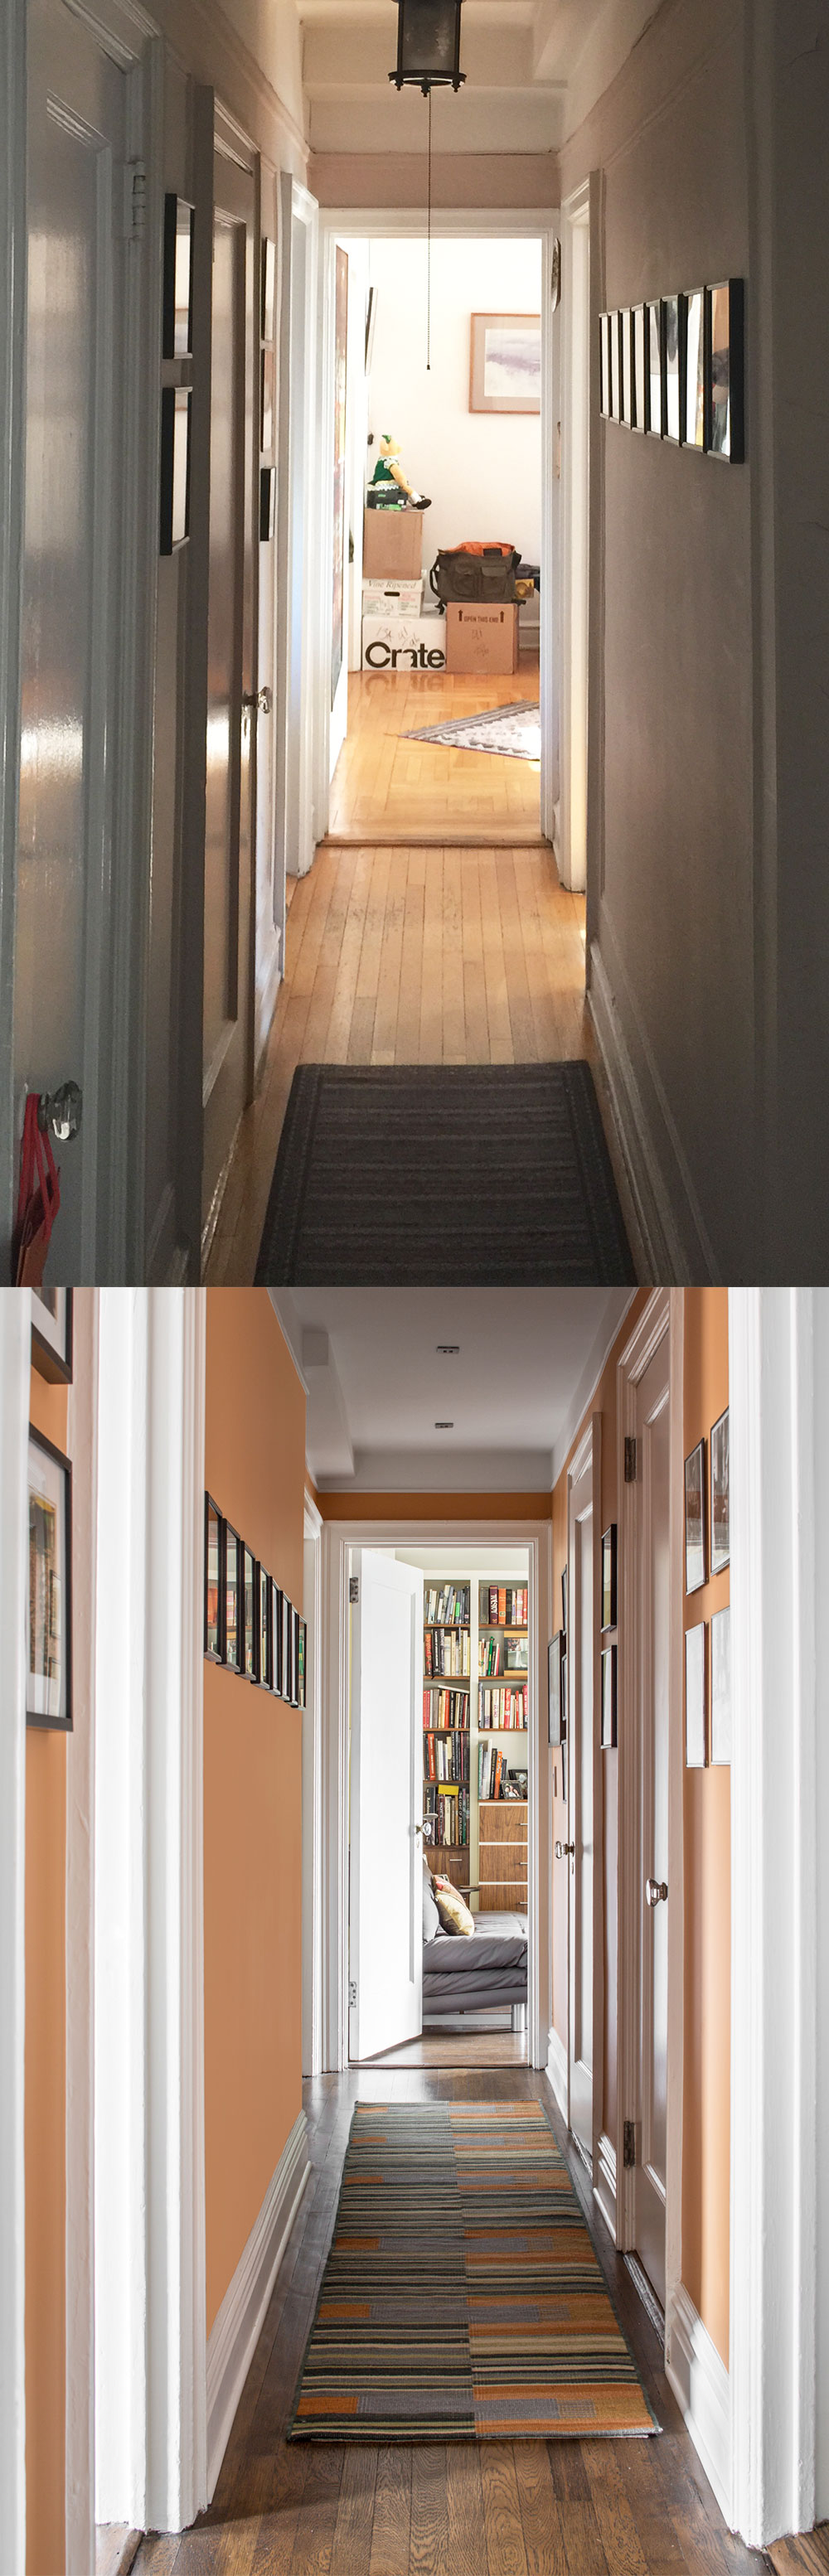 before and after pictures of a renovated hallway